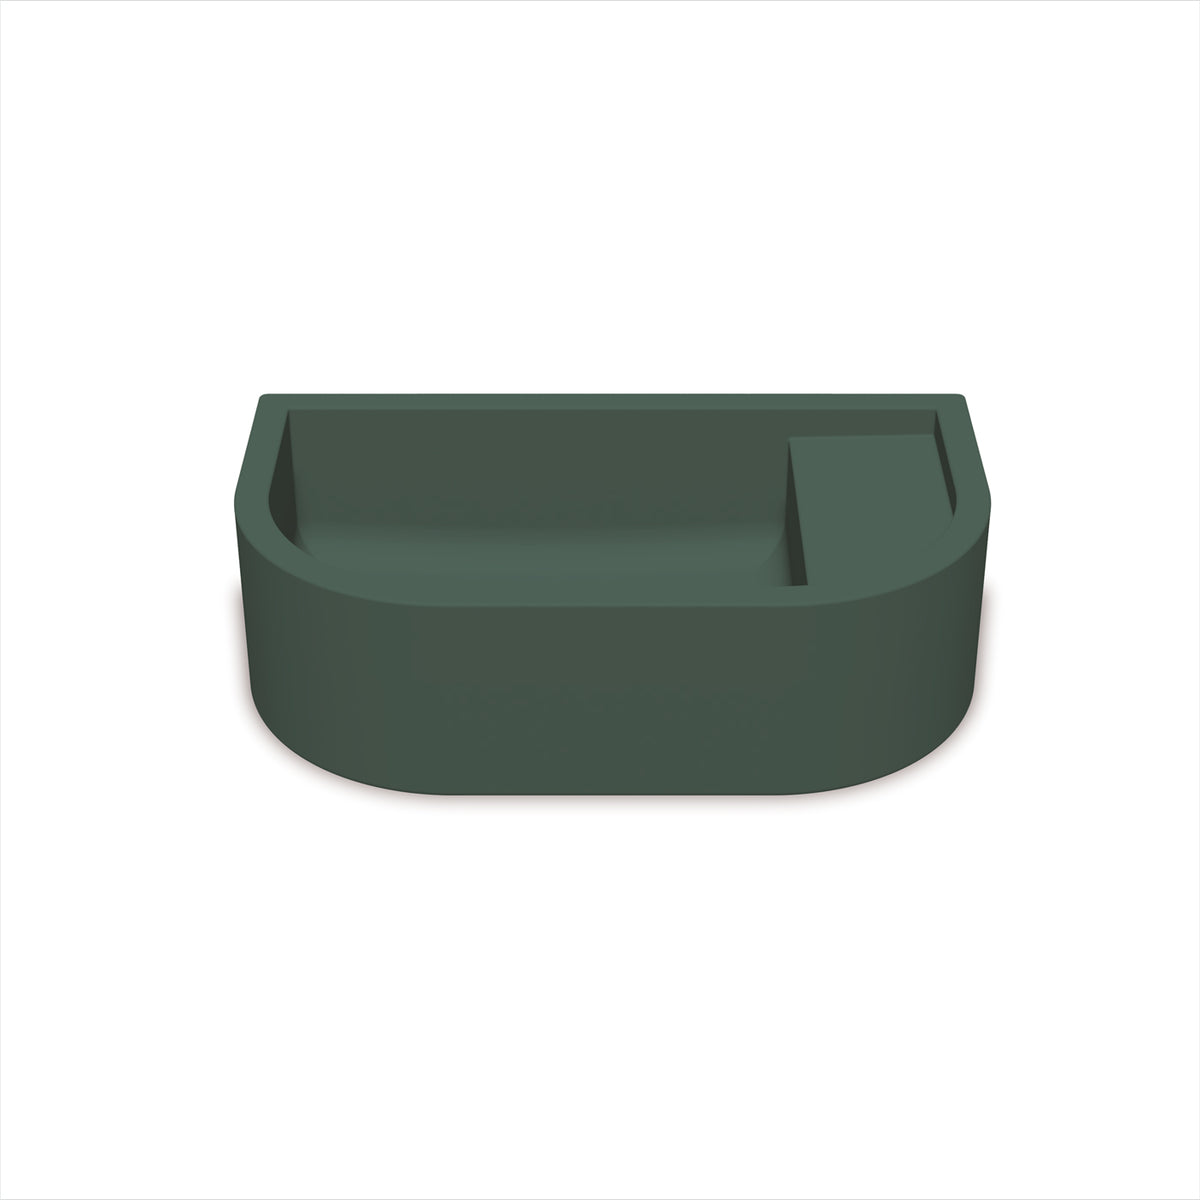 Loop 01 Basin - Overflow - Surface Mount (Teal,No Tap Hole,White)